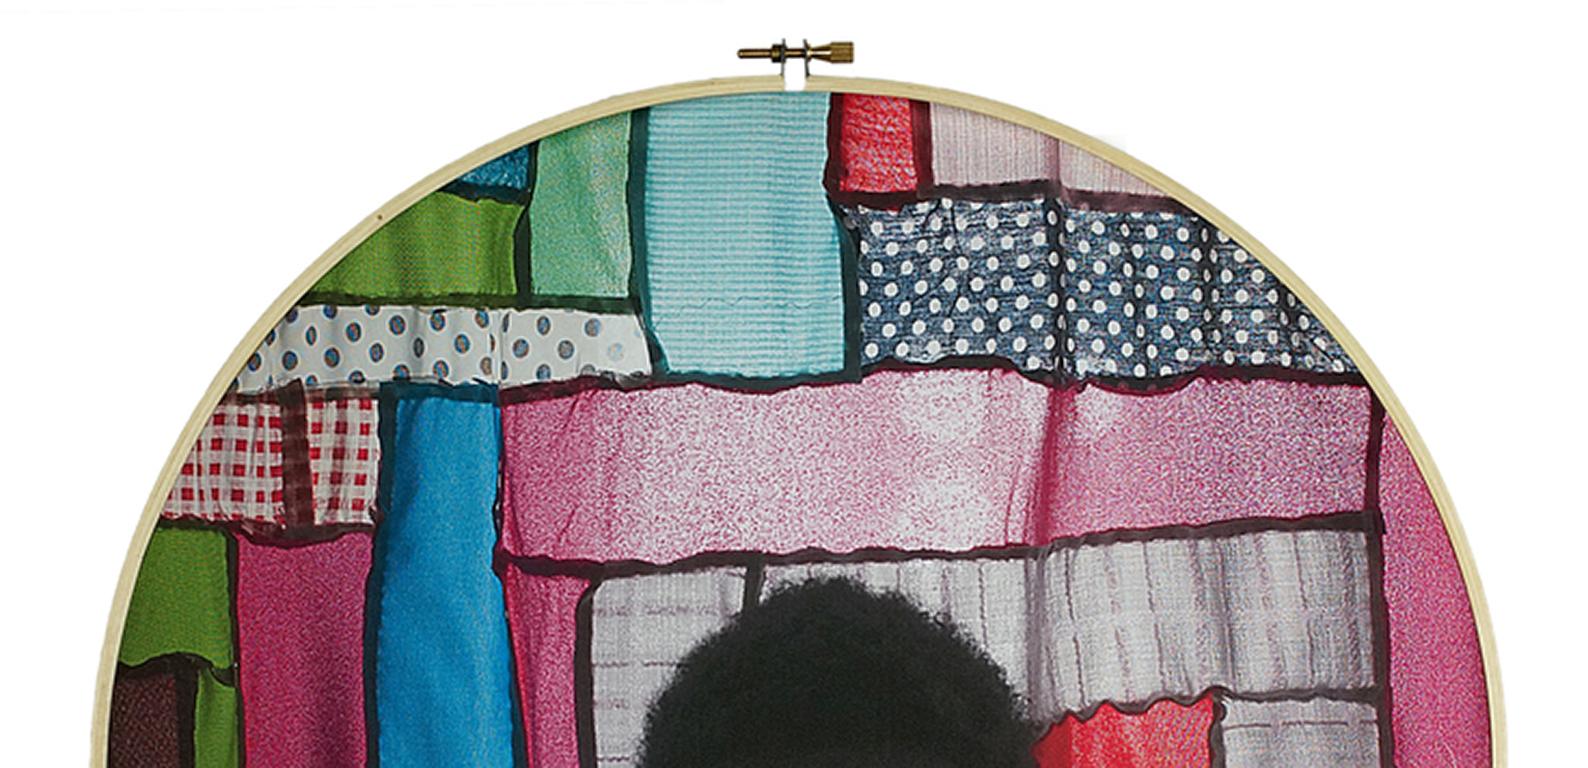 The Rising Sun - Silhouette colorful textile fabric print in embroidery hoop - Contemporary Photograph by Letitia Huckaby